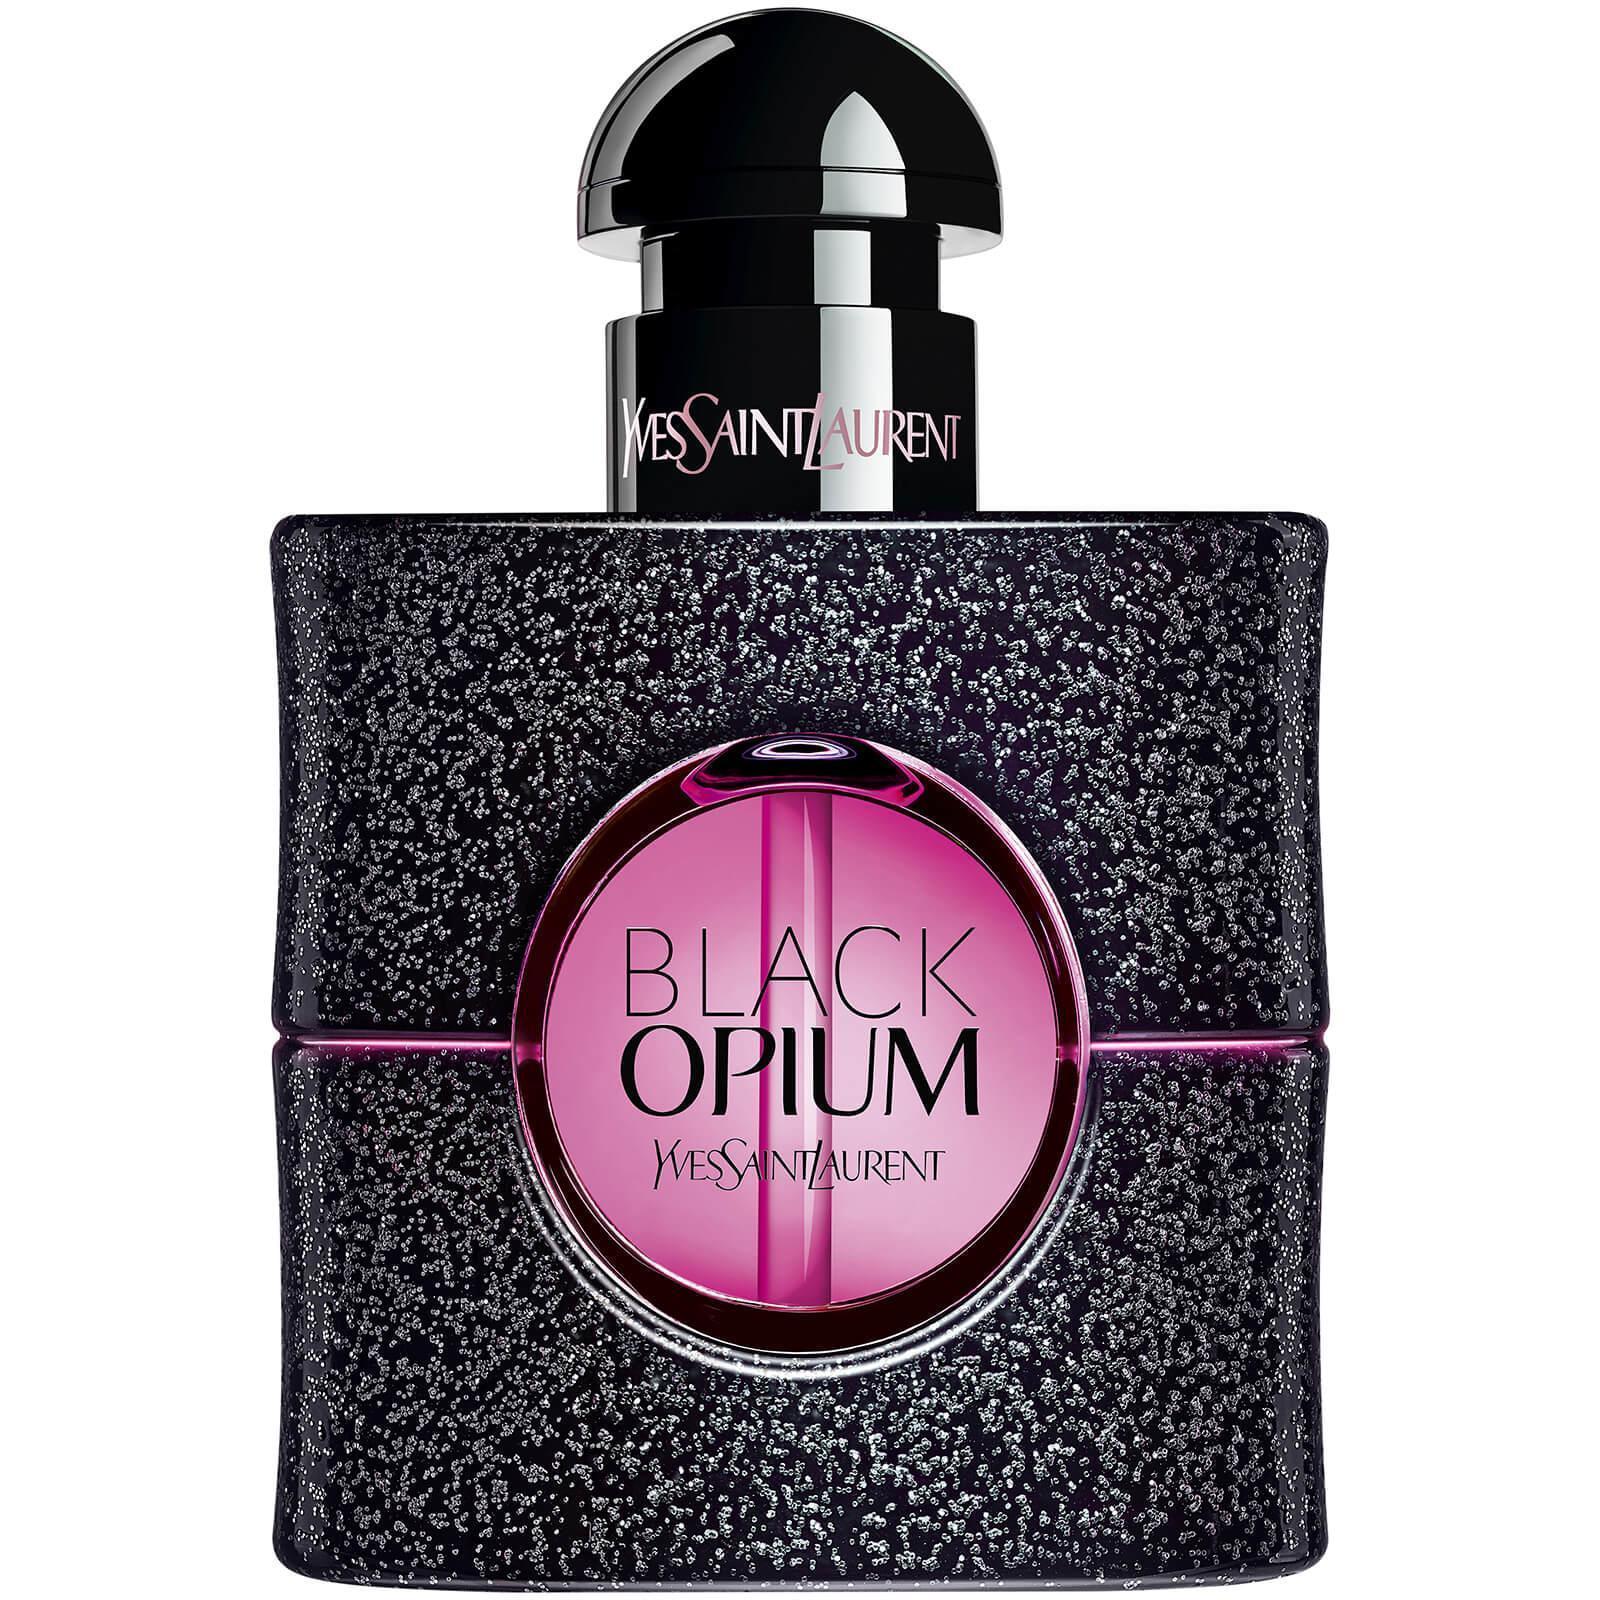 black friday, perfume, indybest, fragrance, amazon, black friday, best perfume deals in the cyber monday friday sales, from lancôme to ysl